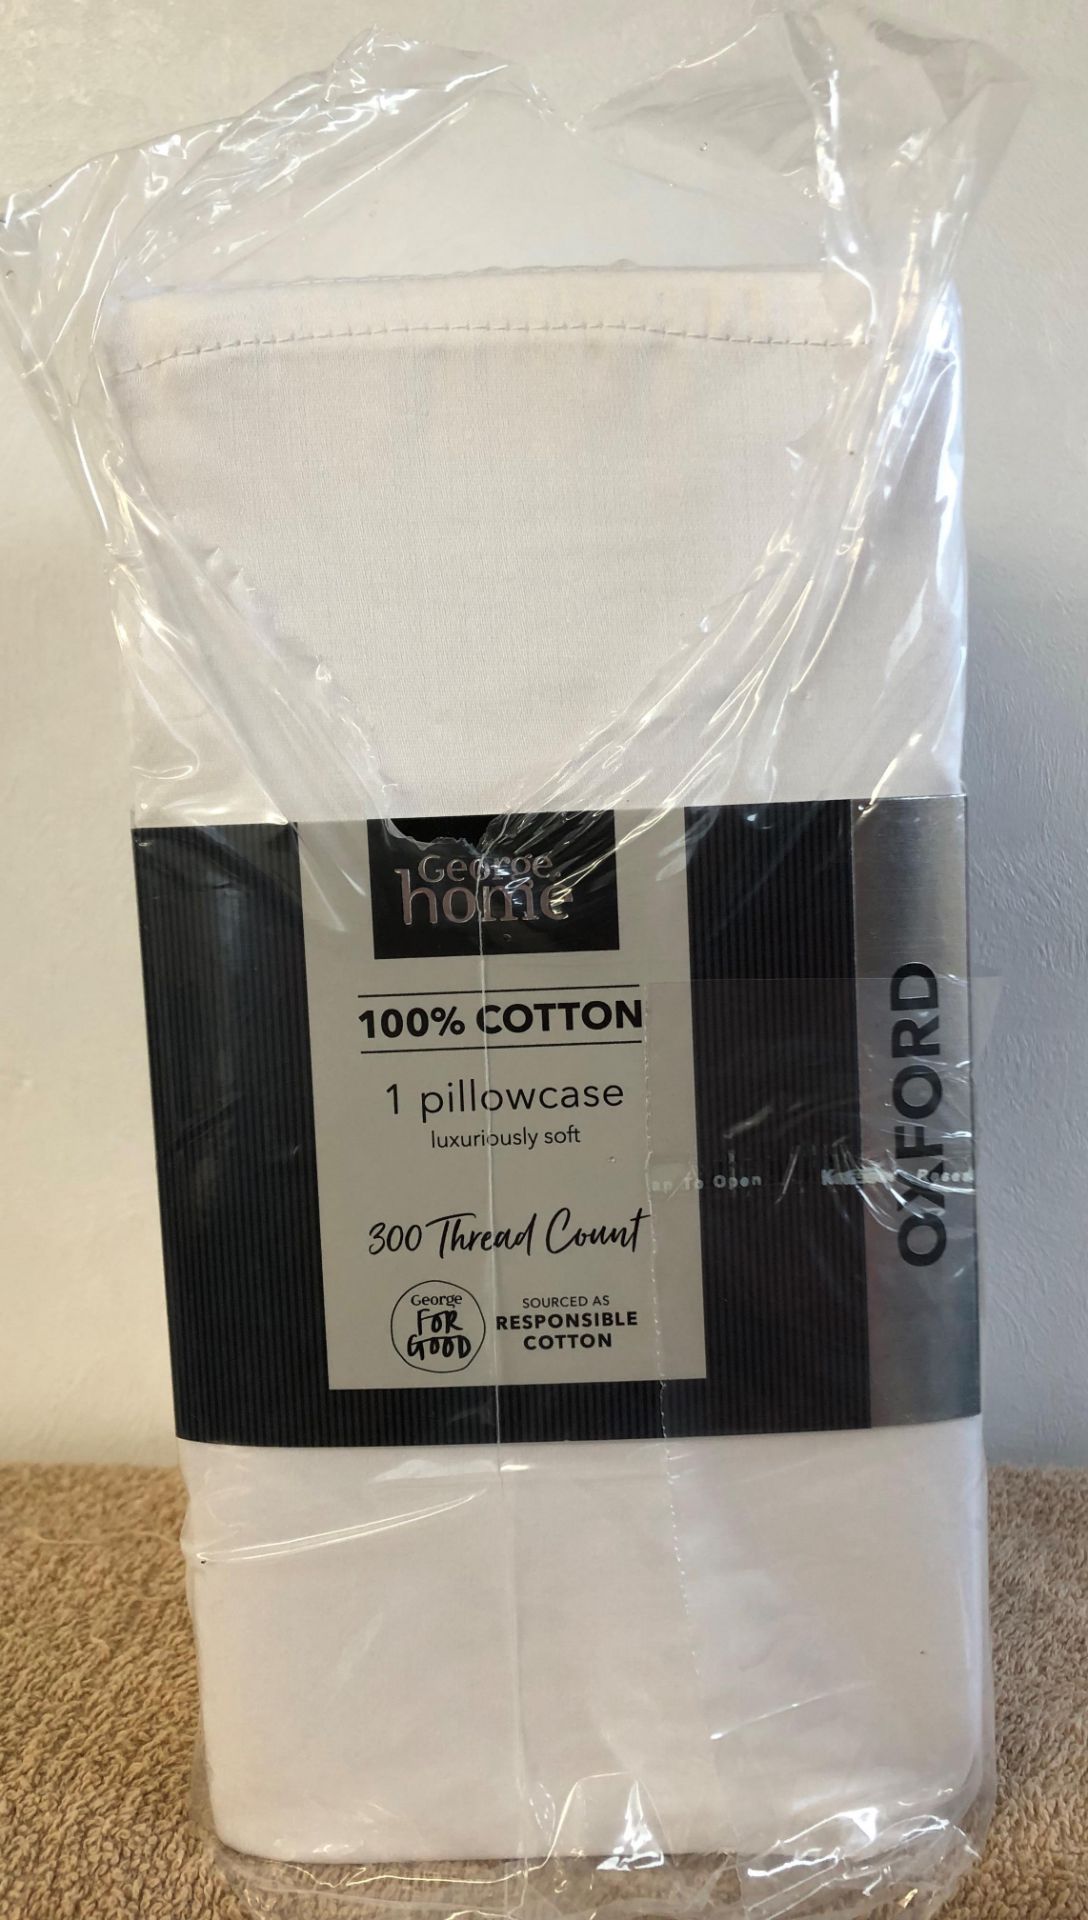 6 WHITE OXFORD PILLOWCASES LUXURY SOFT 300 THREAD COUNT W48 X L74CM 100% COTTON BY GEORGE HOME - Image 2 of 2